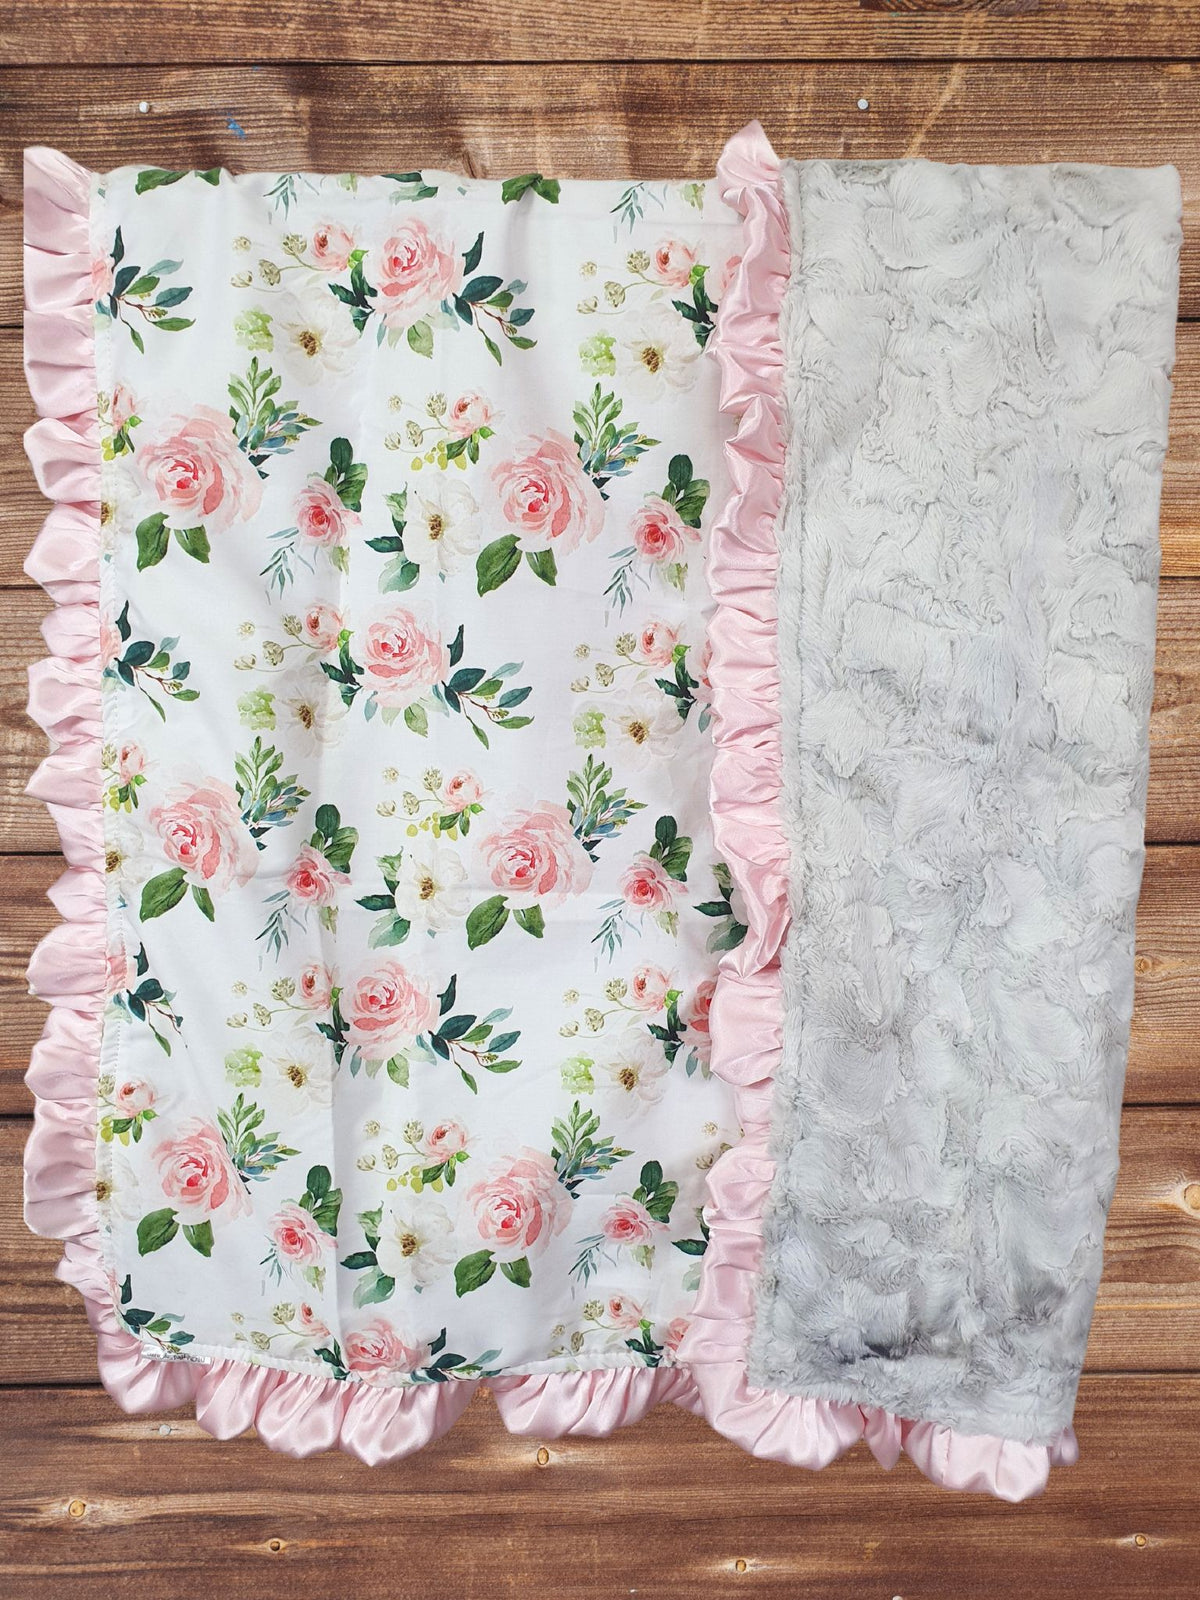 Baby Ruffle Blanket - Blush Floral Baby Blanket - DBC Baby Bedding Co 